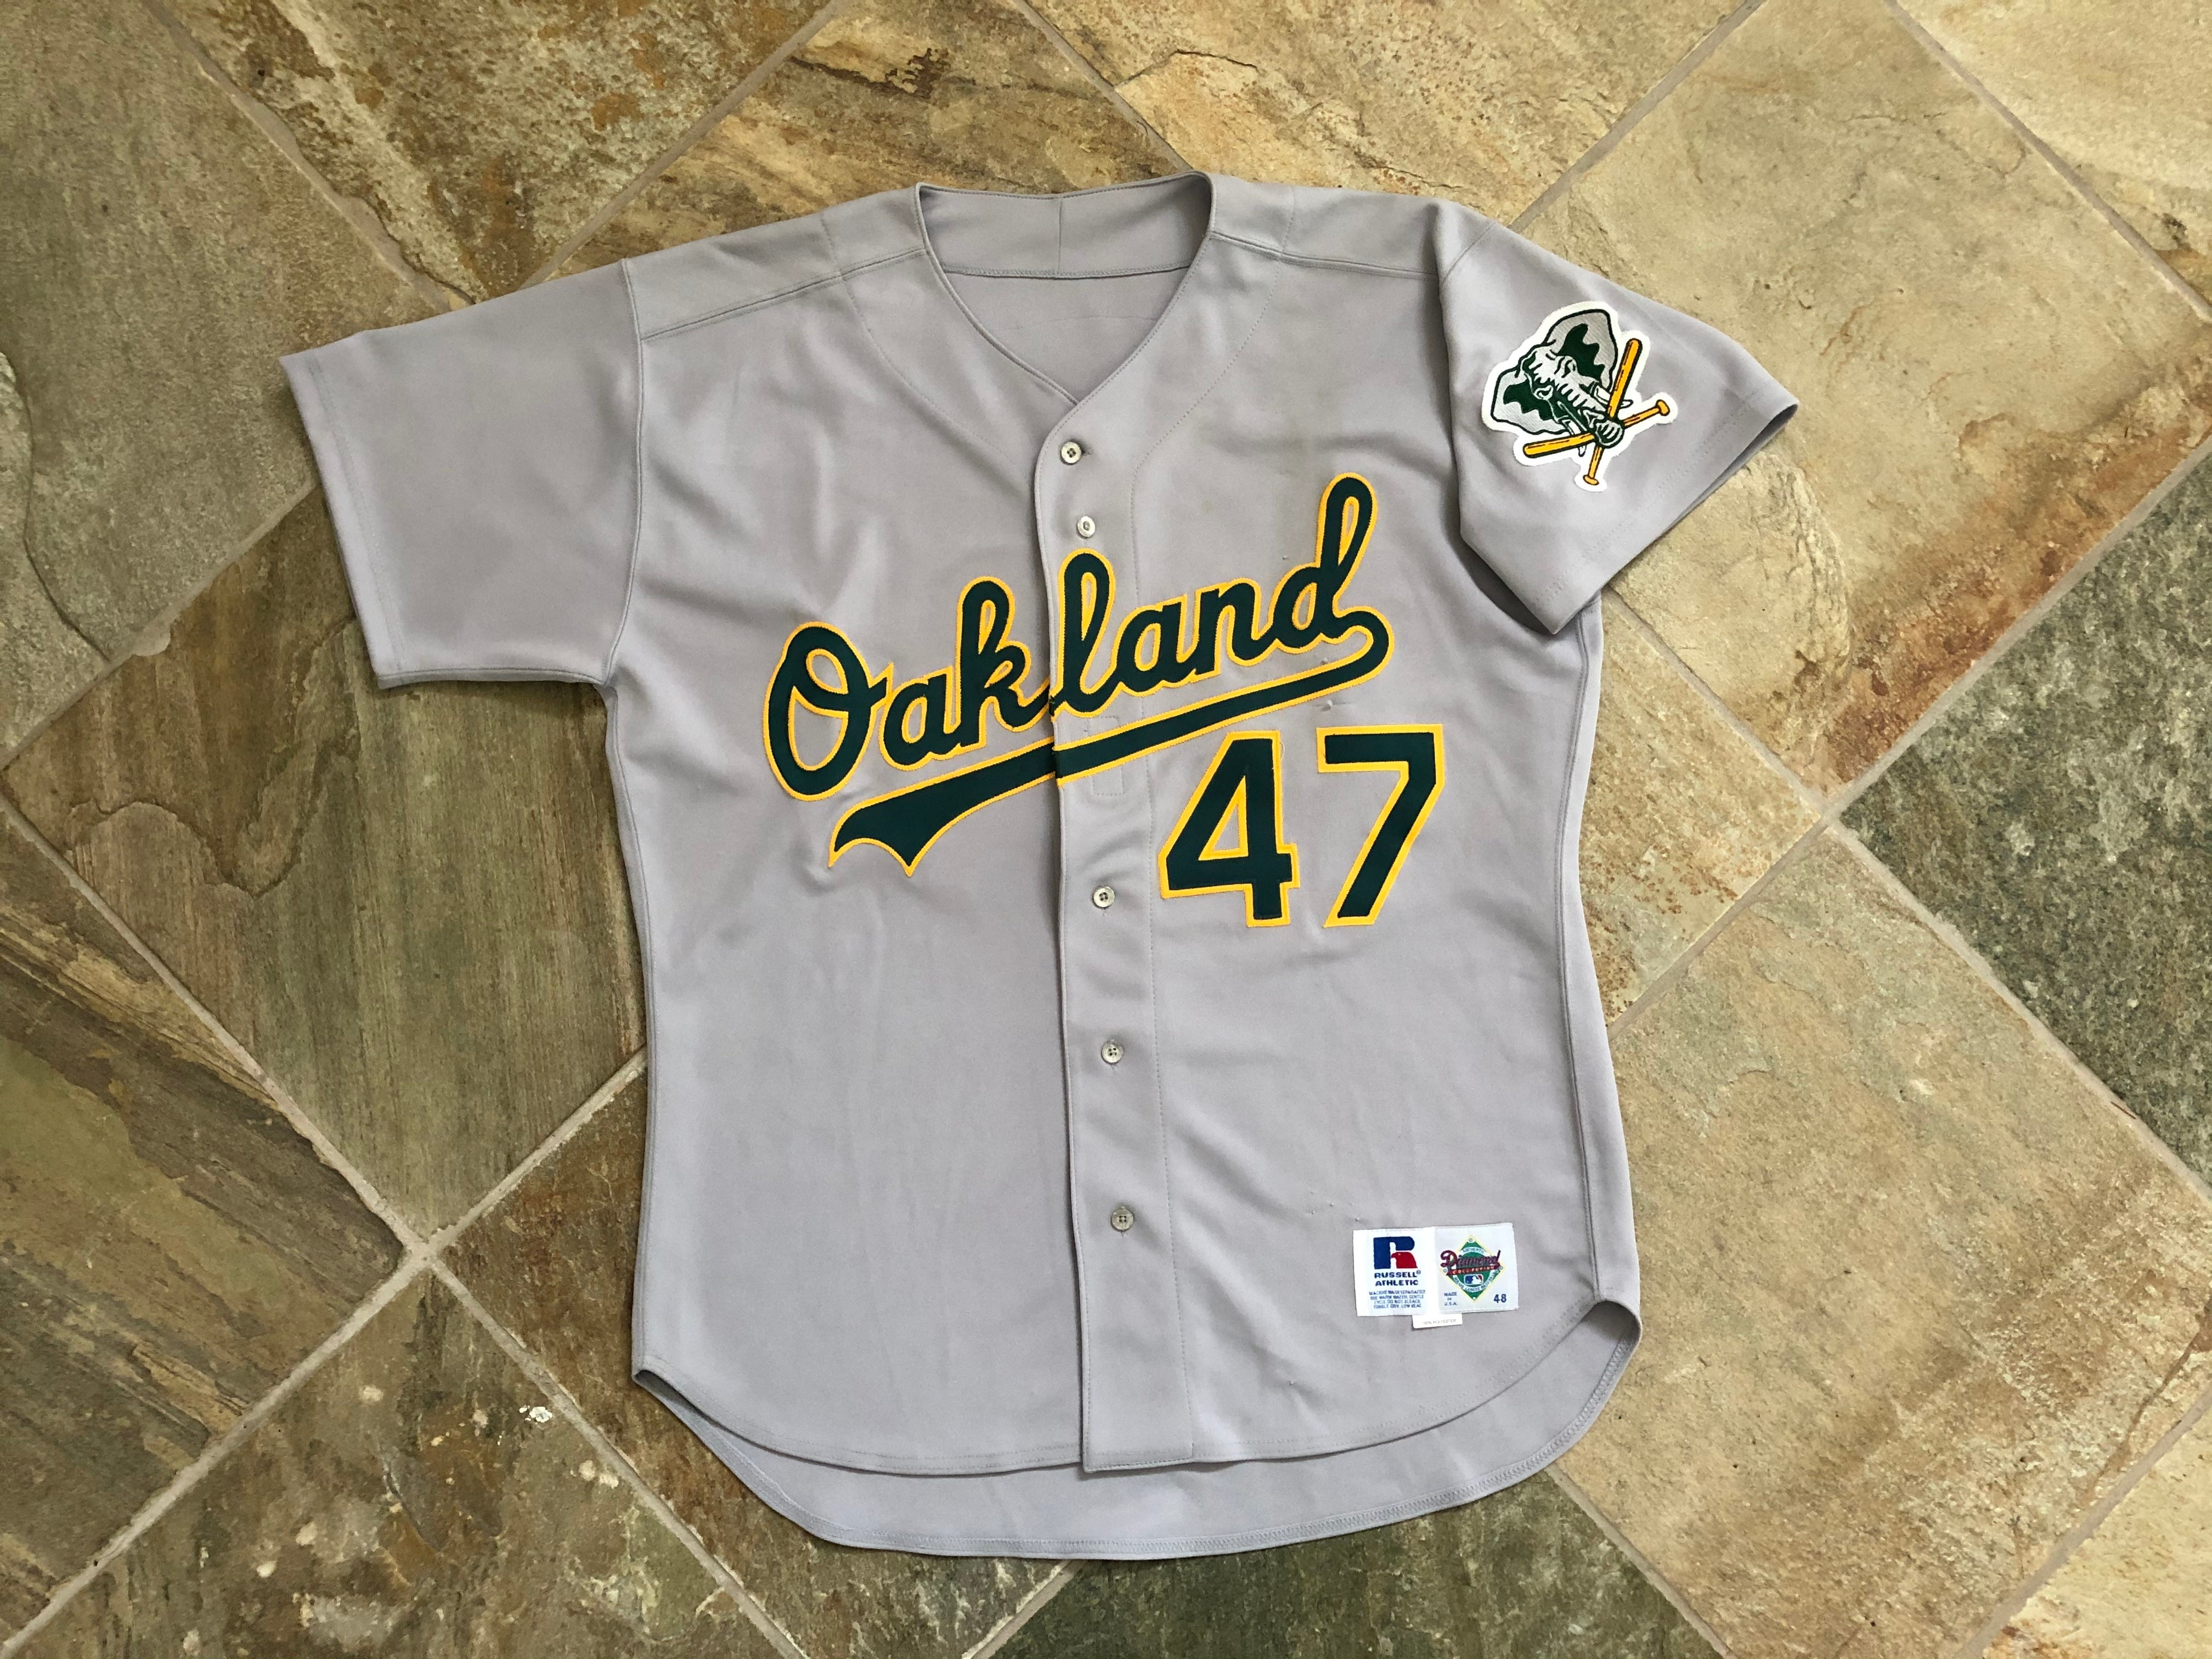 Vintage 1980s Oakland Athletics A's Jersey by Rawlings, Screened